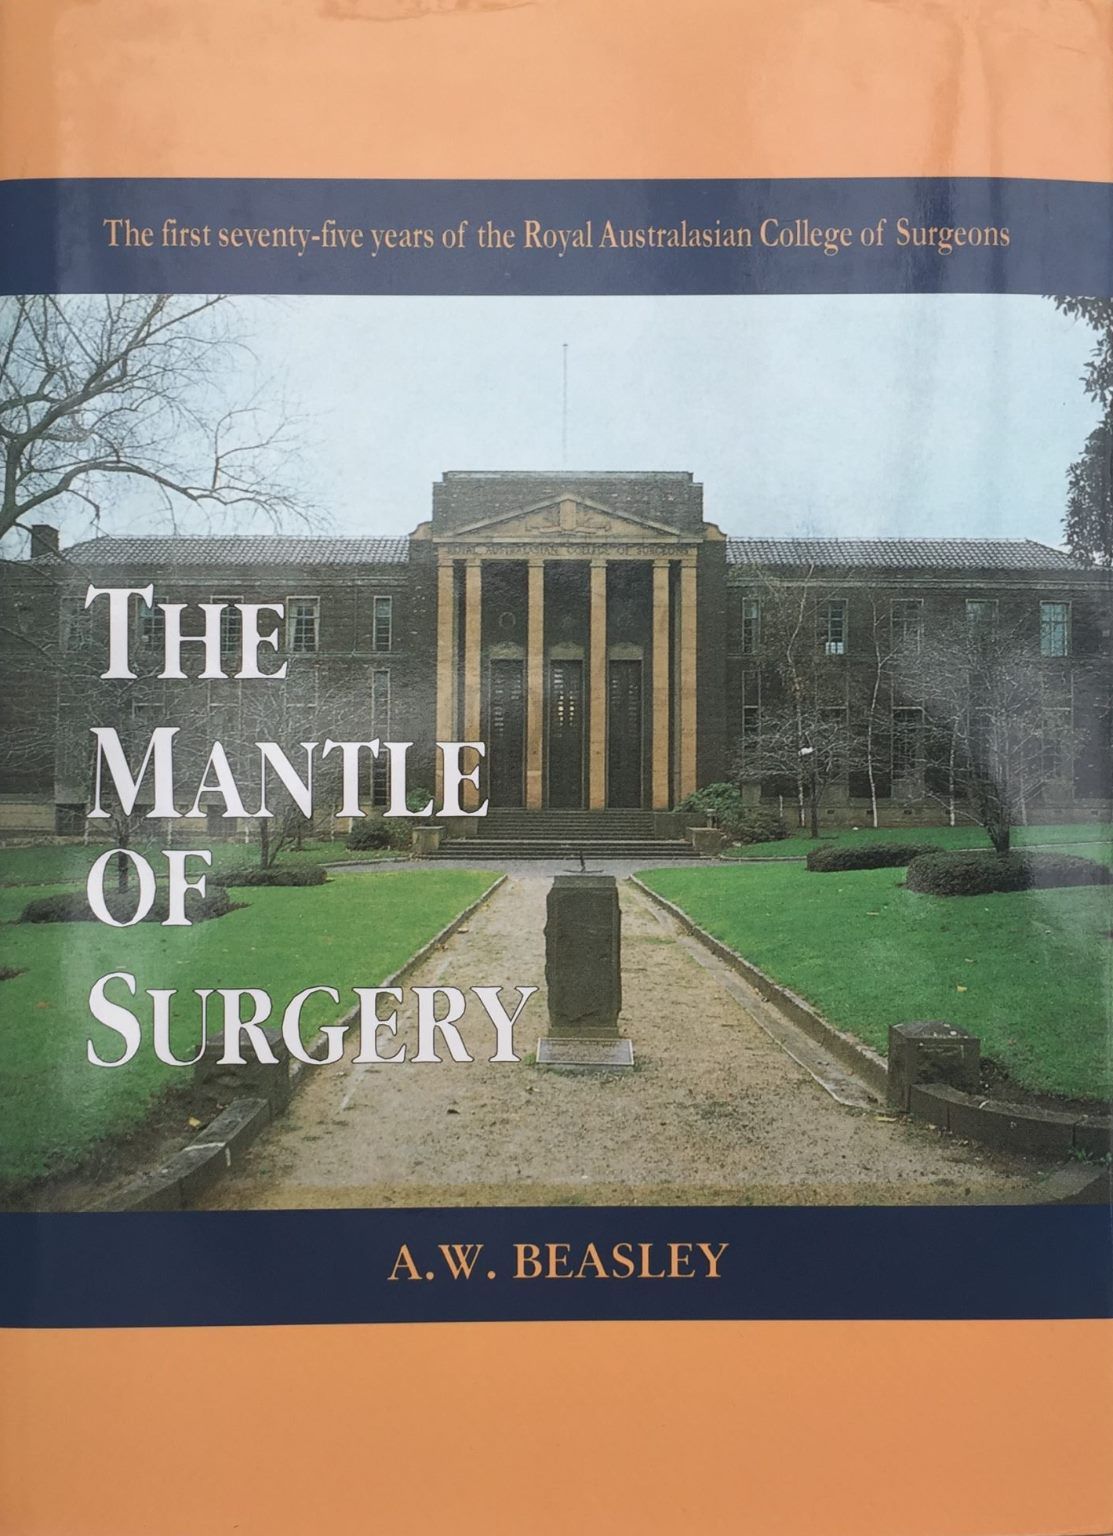 THE MANTLE OF SURGERY: 75 Years of The Royal Australasian College of Surgeons